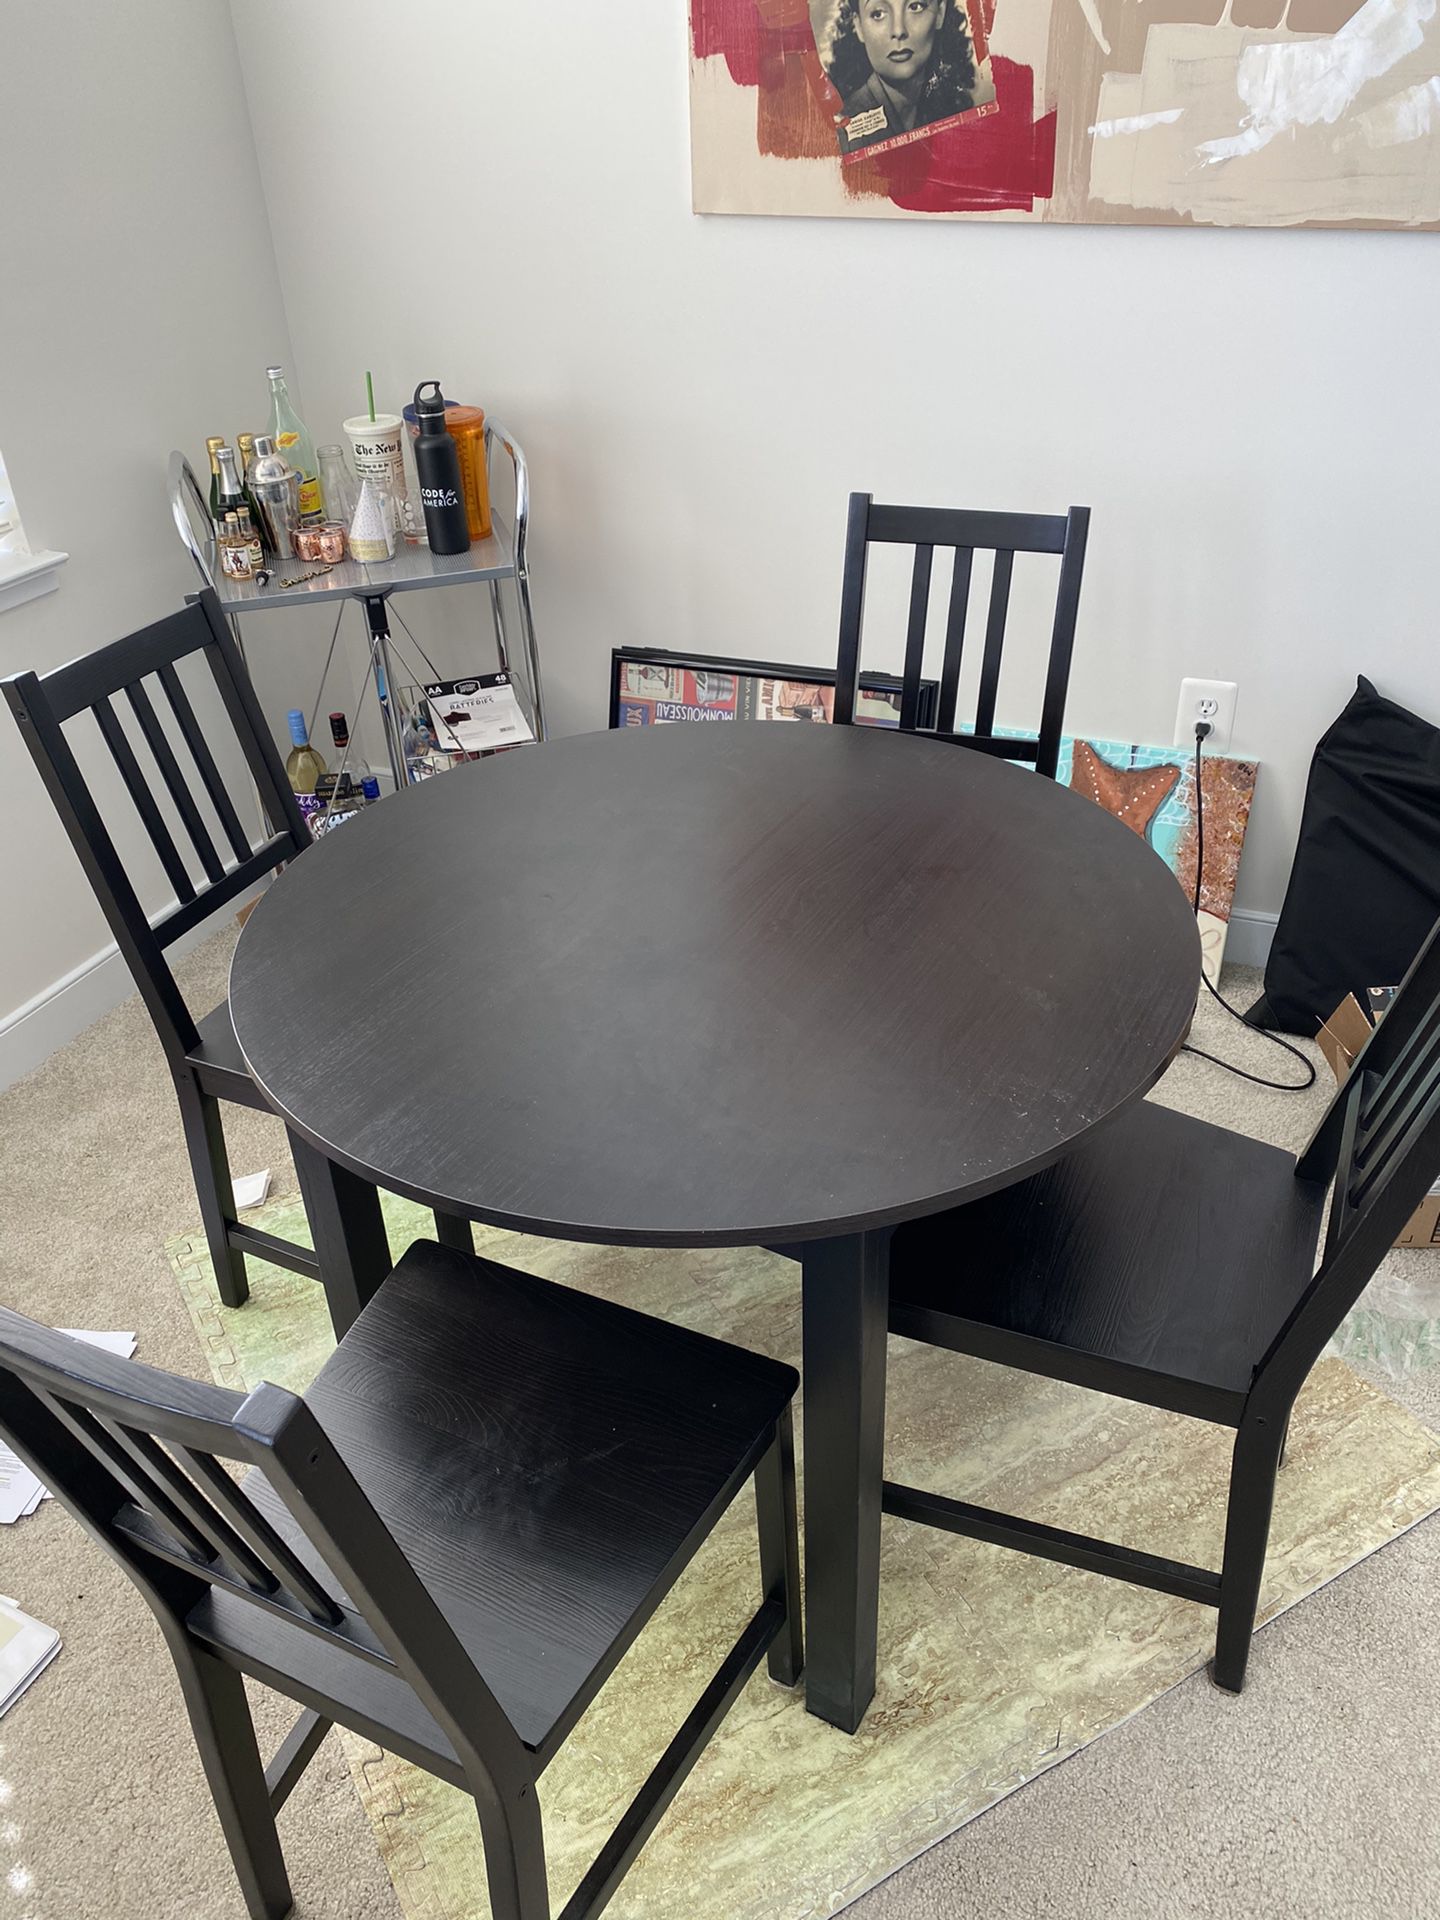 Set of table & chairs